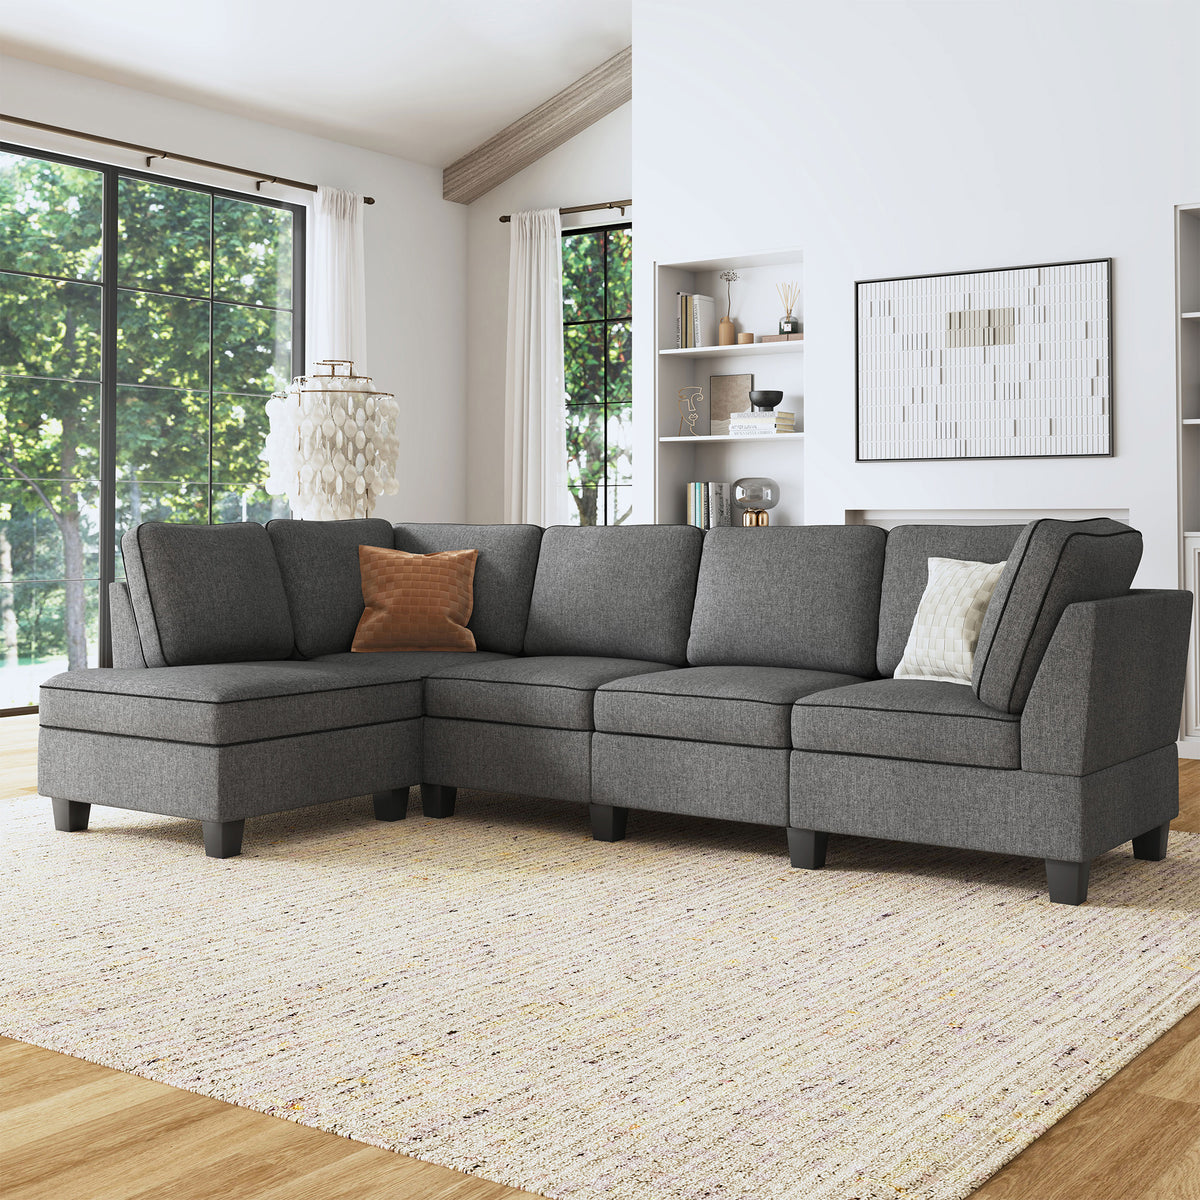 Modern L Shaped 4 Seat Fabirc Sectional Corner Sofa For Living Room Honbay Official Free Shipping